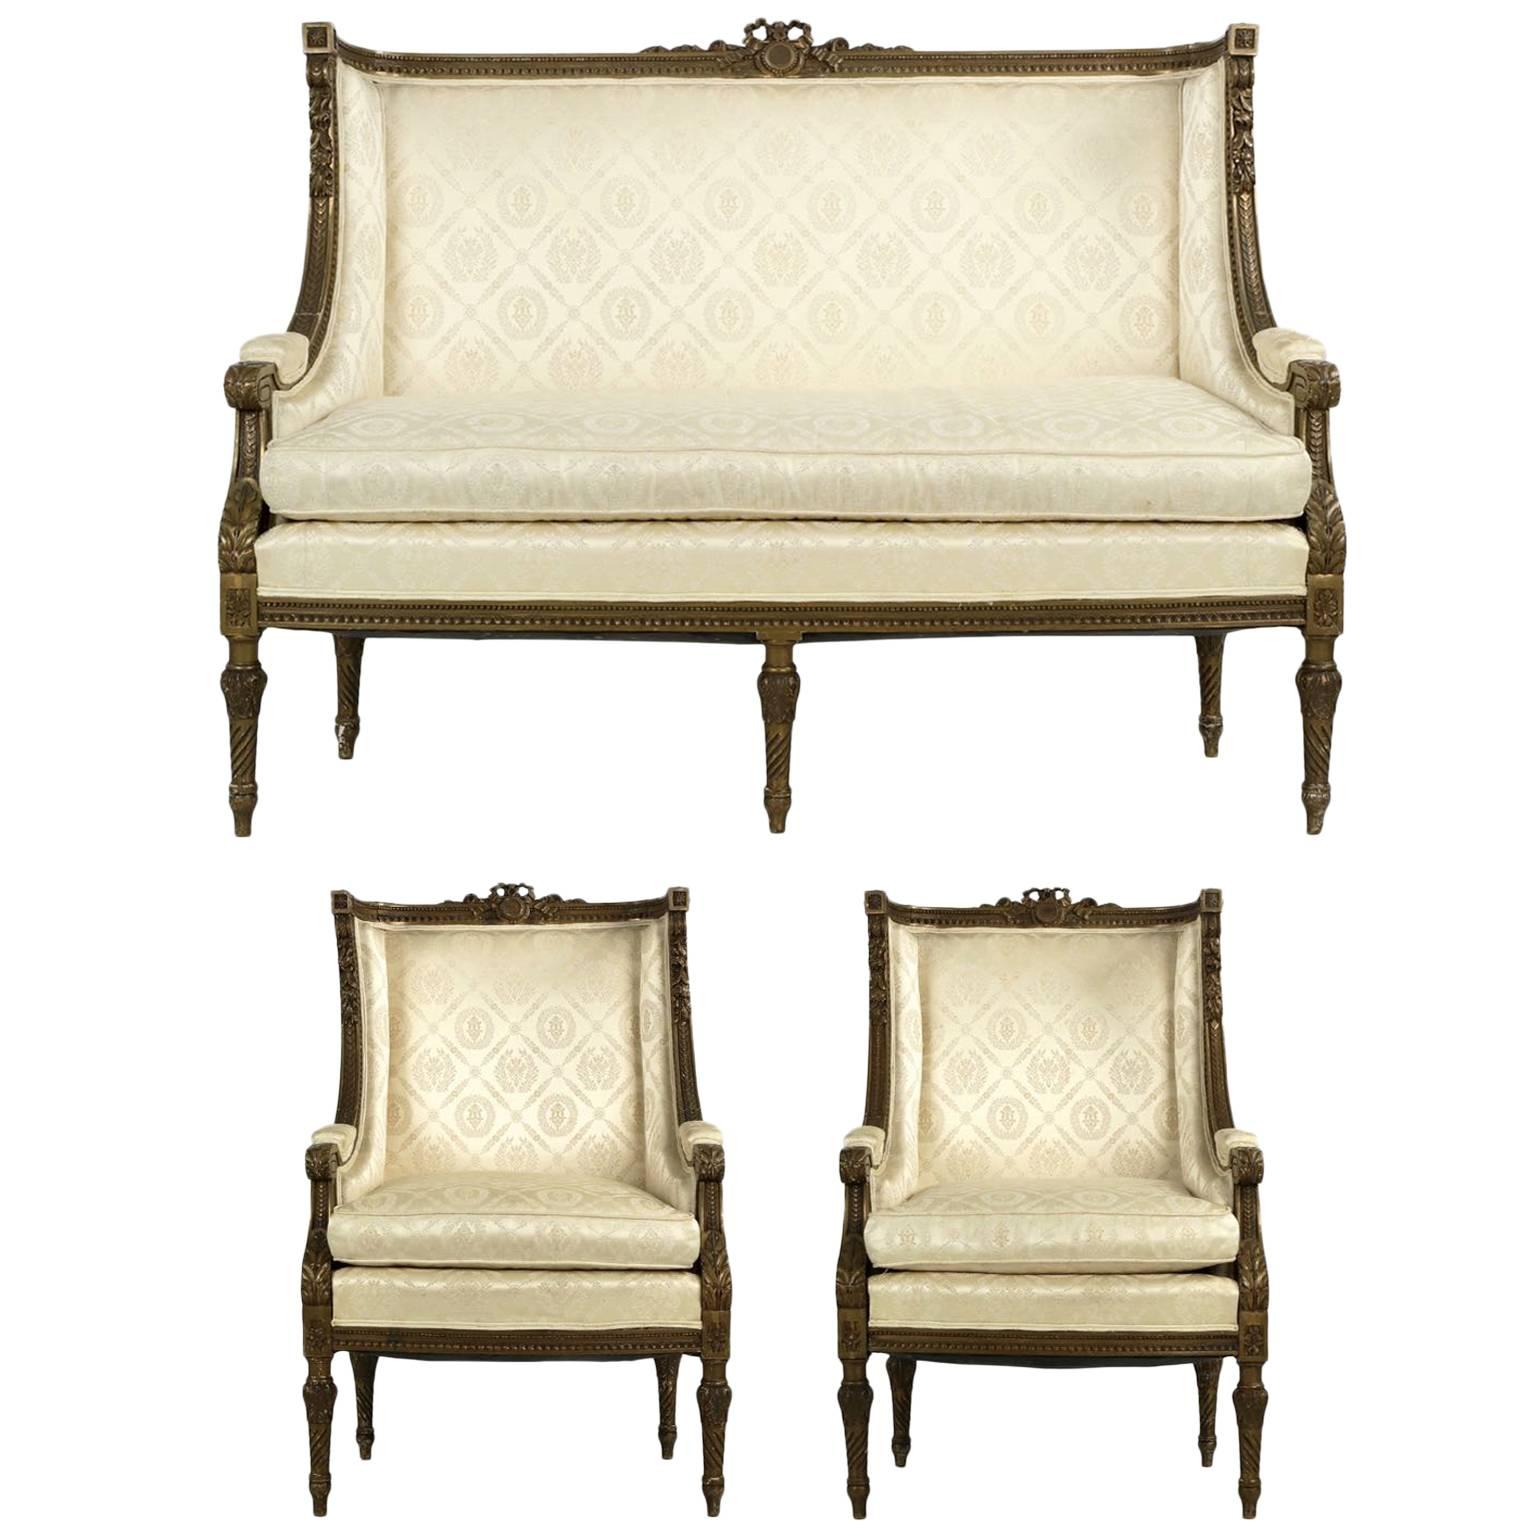 19th Century French Louis XVI Style Green Suite of Antique Settee and Two Chairs